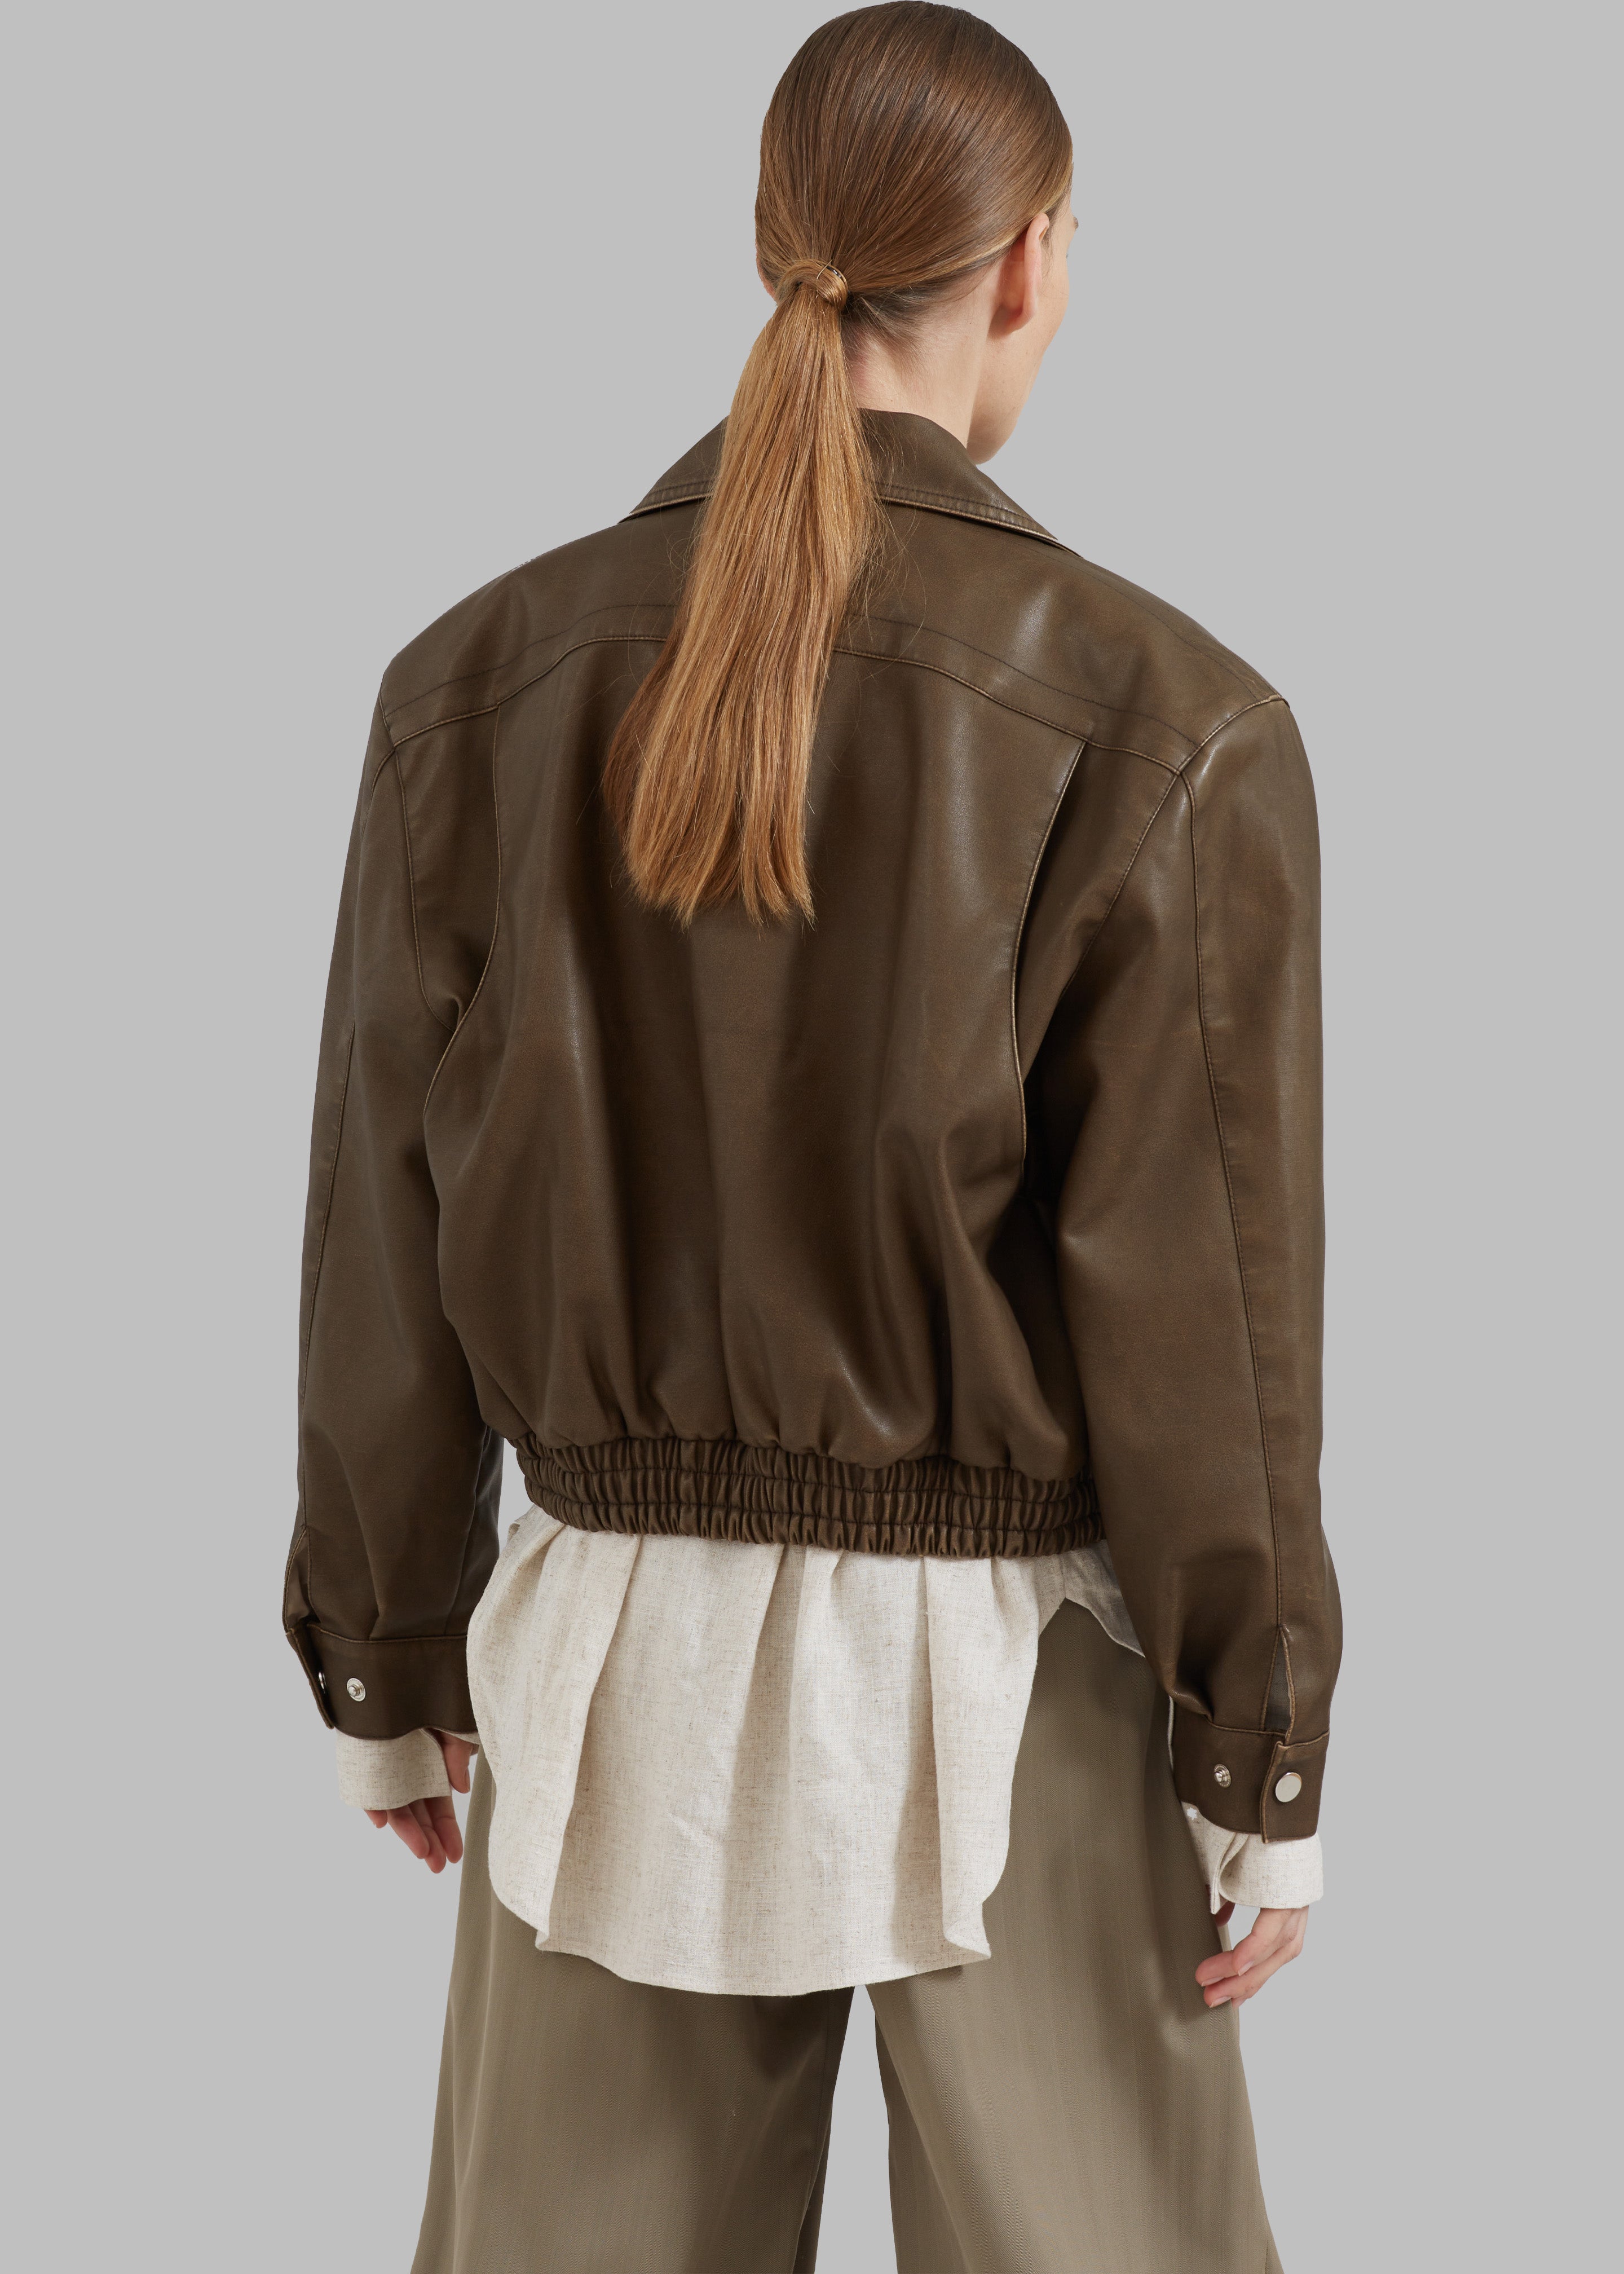 Jaden Faux Leather Bomber - Brown - 4